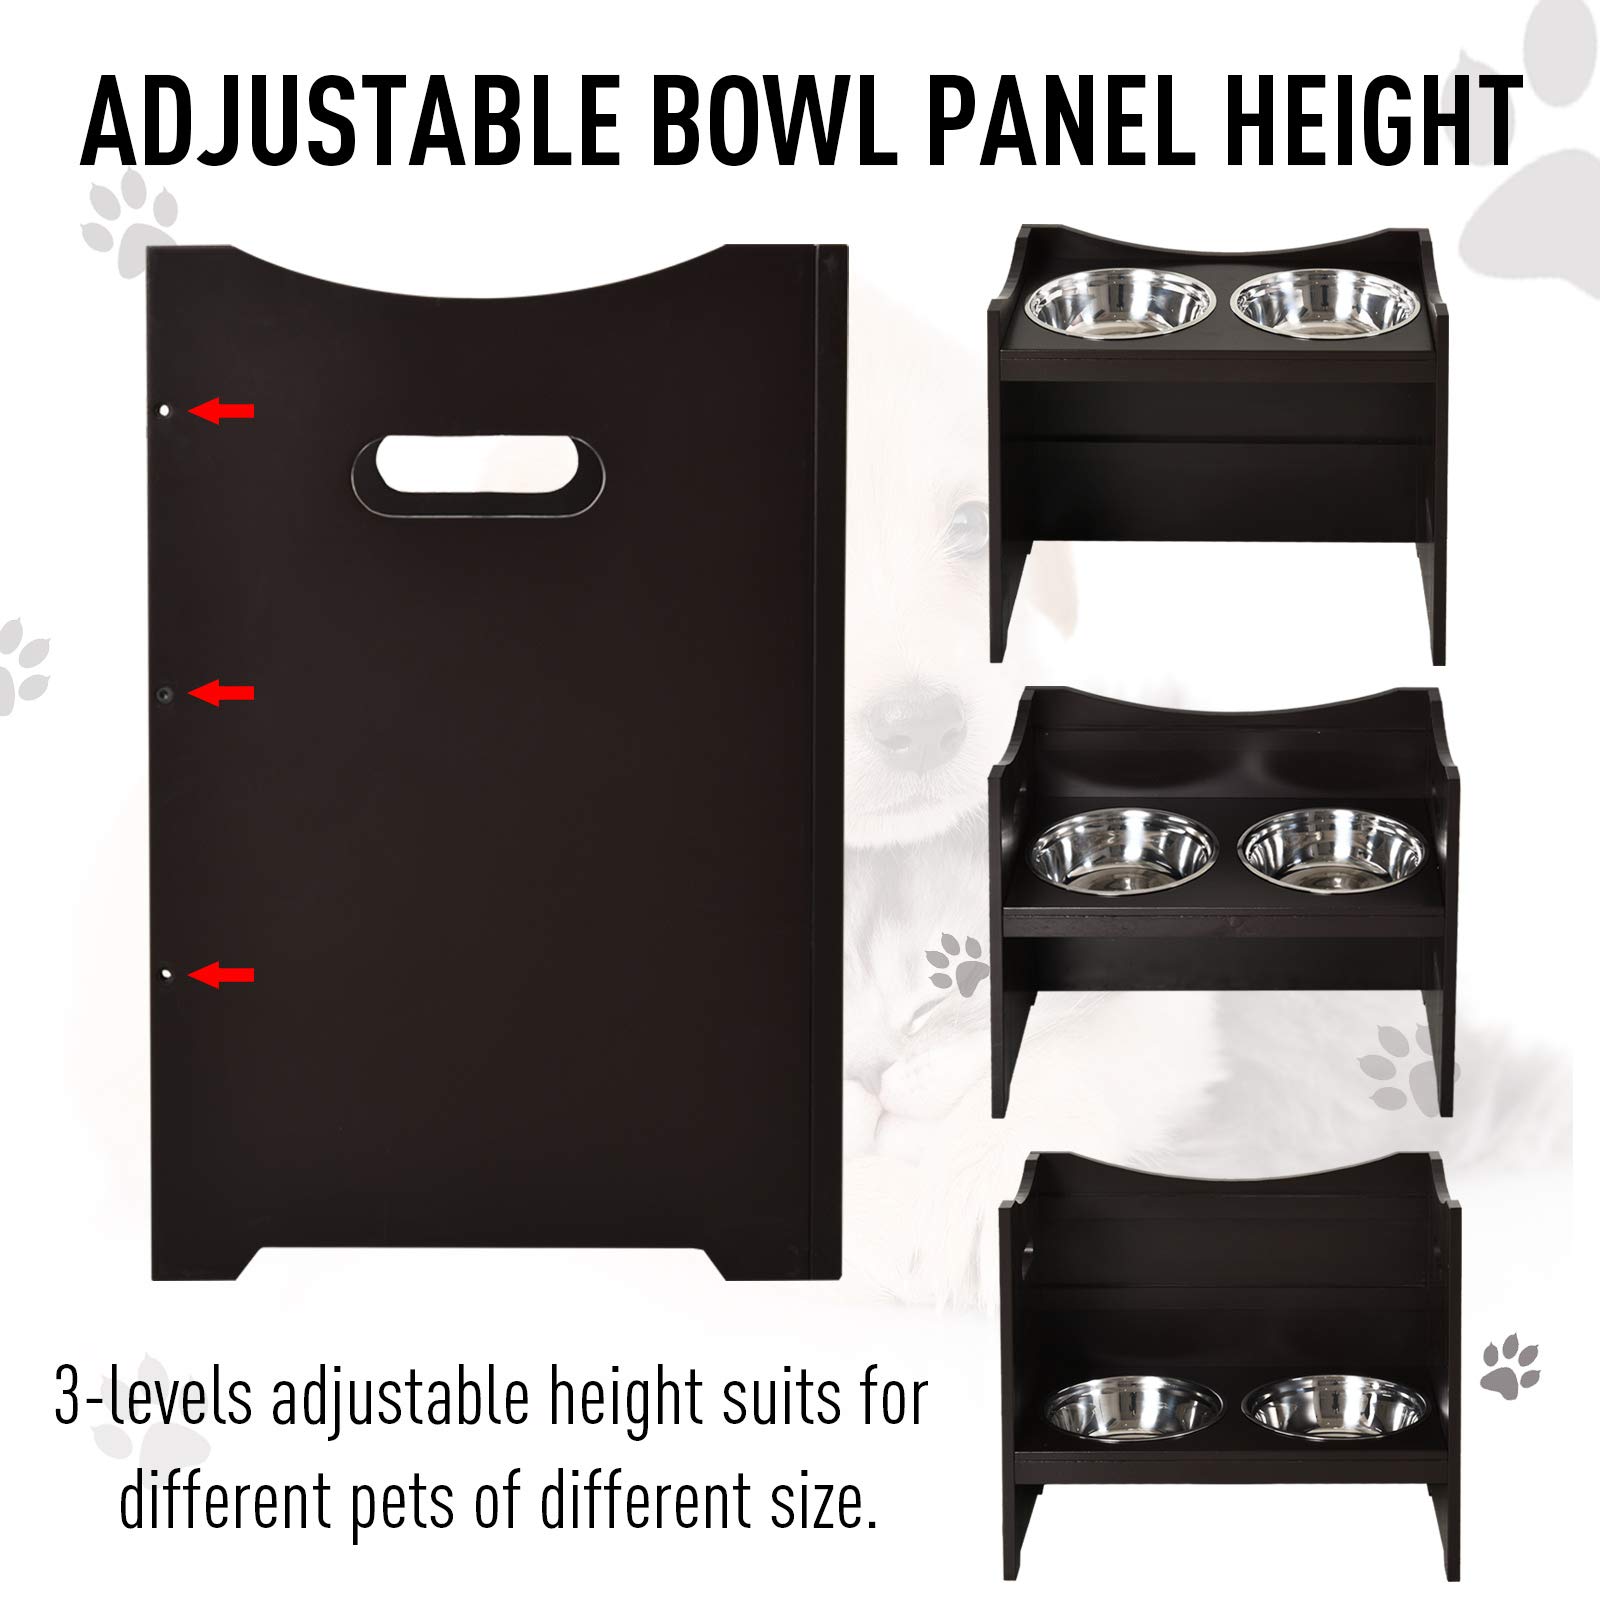 PawHut Raised Pet Food Elevated Feeder with 2 Stainless Steel Bowls, 3 Levels Adjustable Height Levels, and Wood Finish